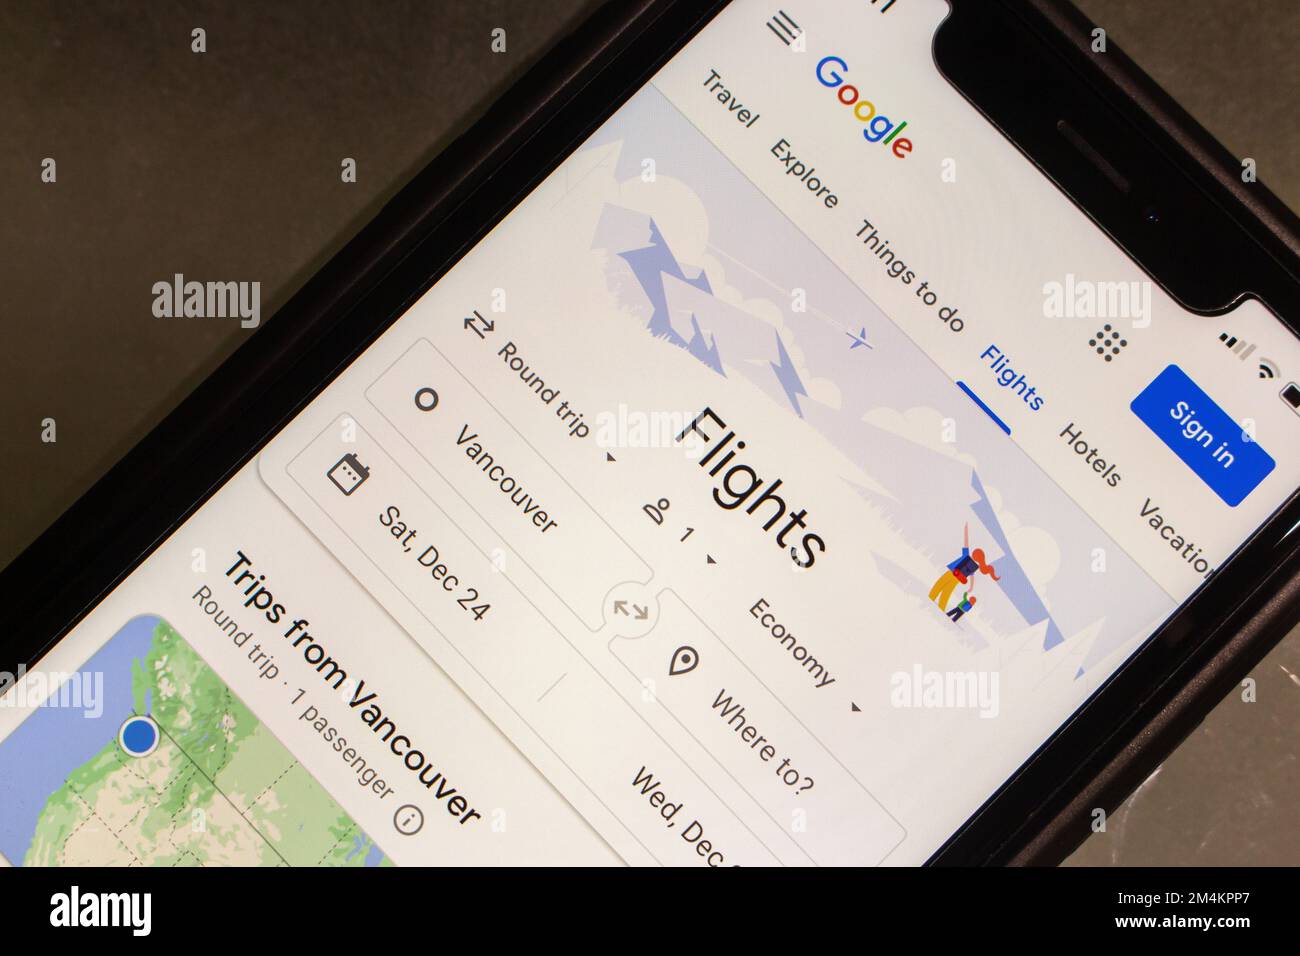 Website of Google Flights, an online flight booking search service for the purchase of airline tickets through third-party suppliers, seen in iPhone Stock Photo